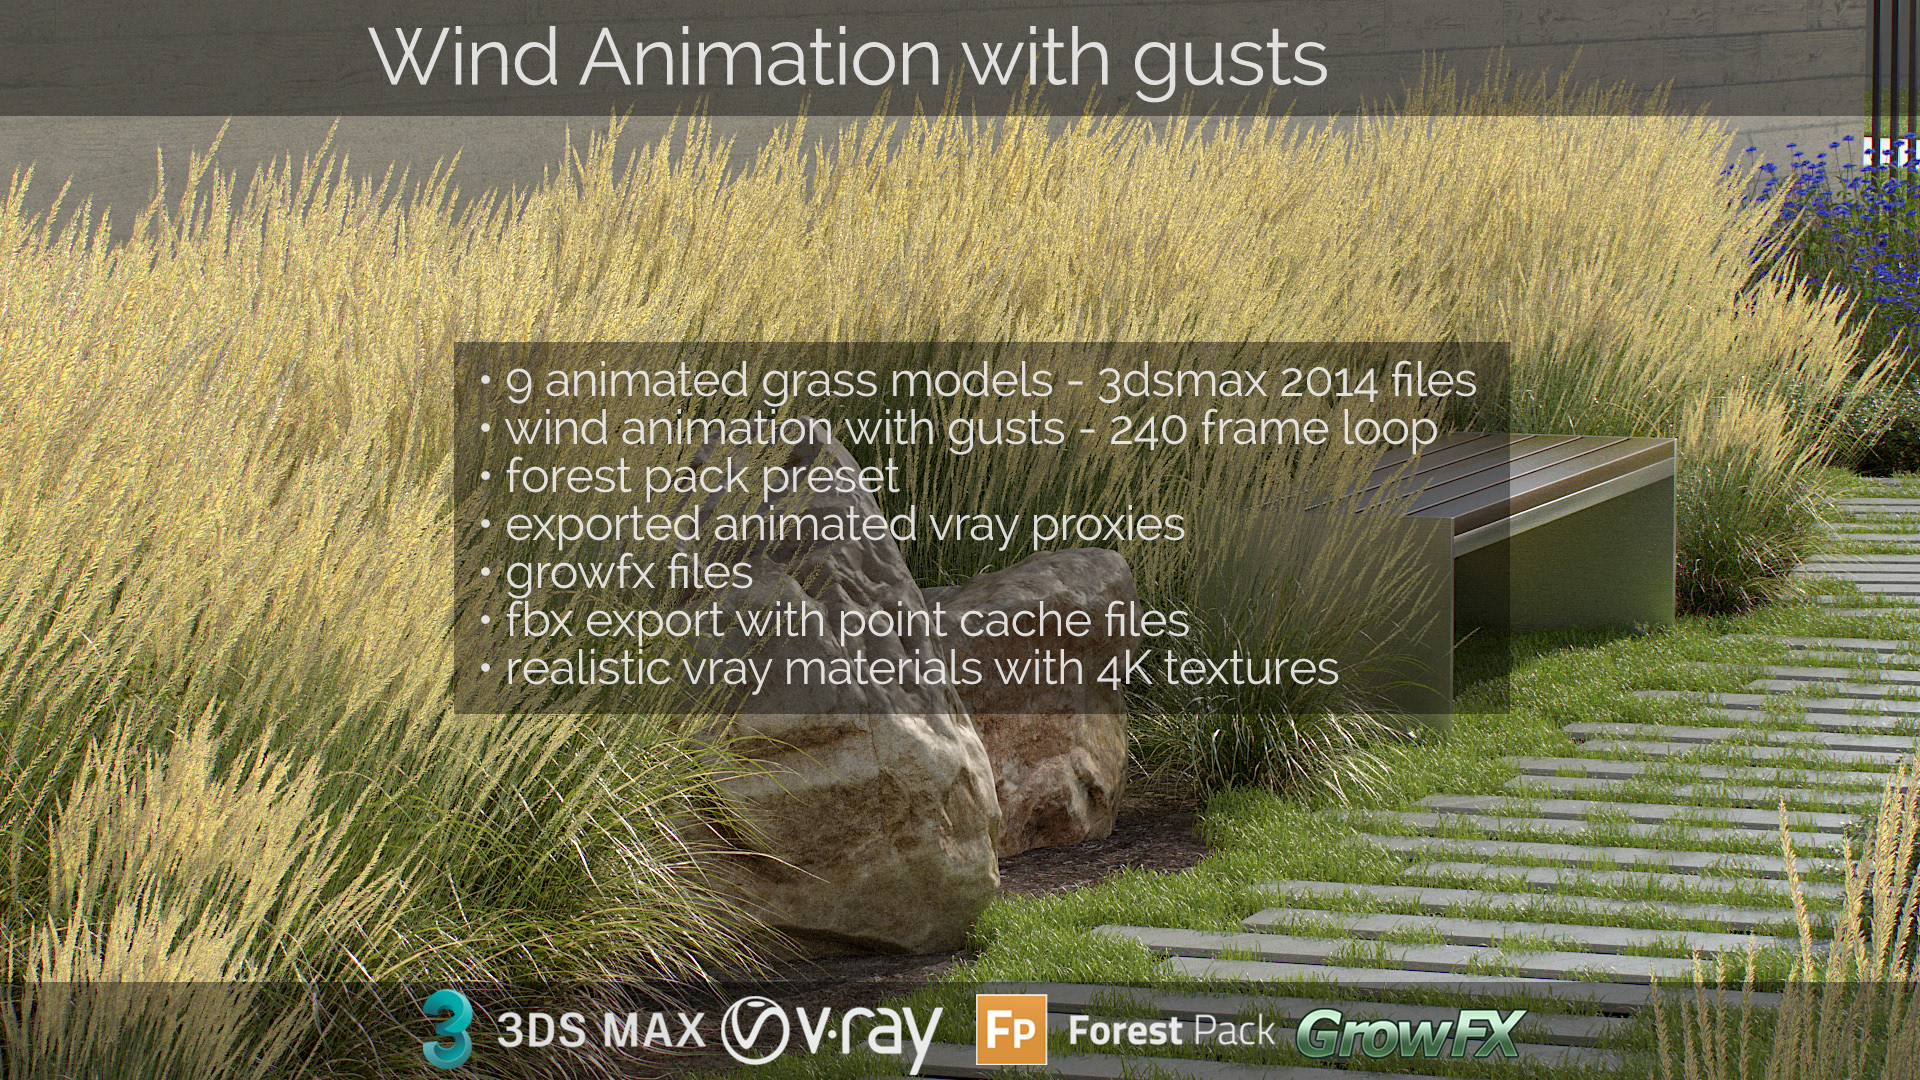 Wind Animation – Feather Reed Grass - 3ds Max, GrowFx on Behance